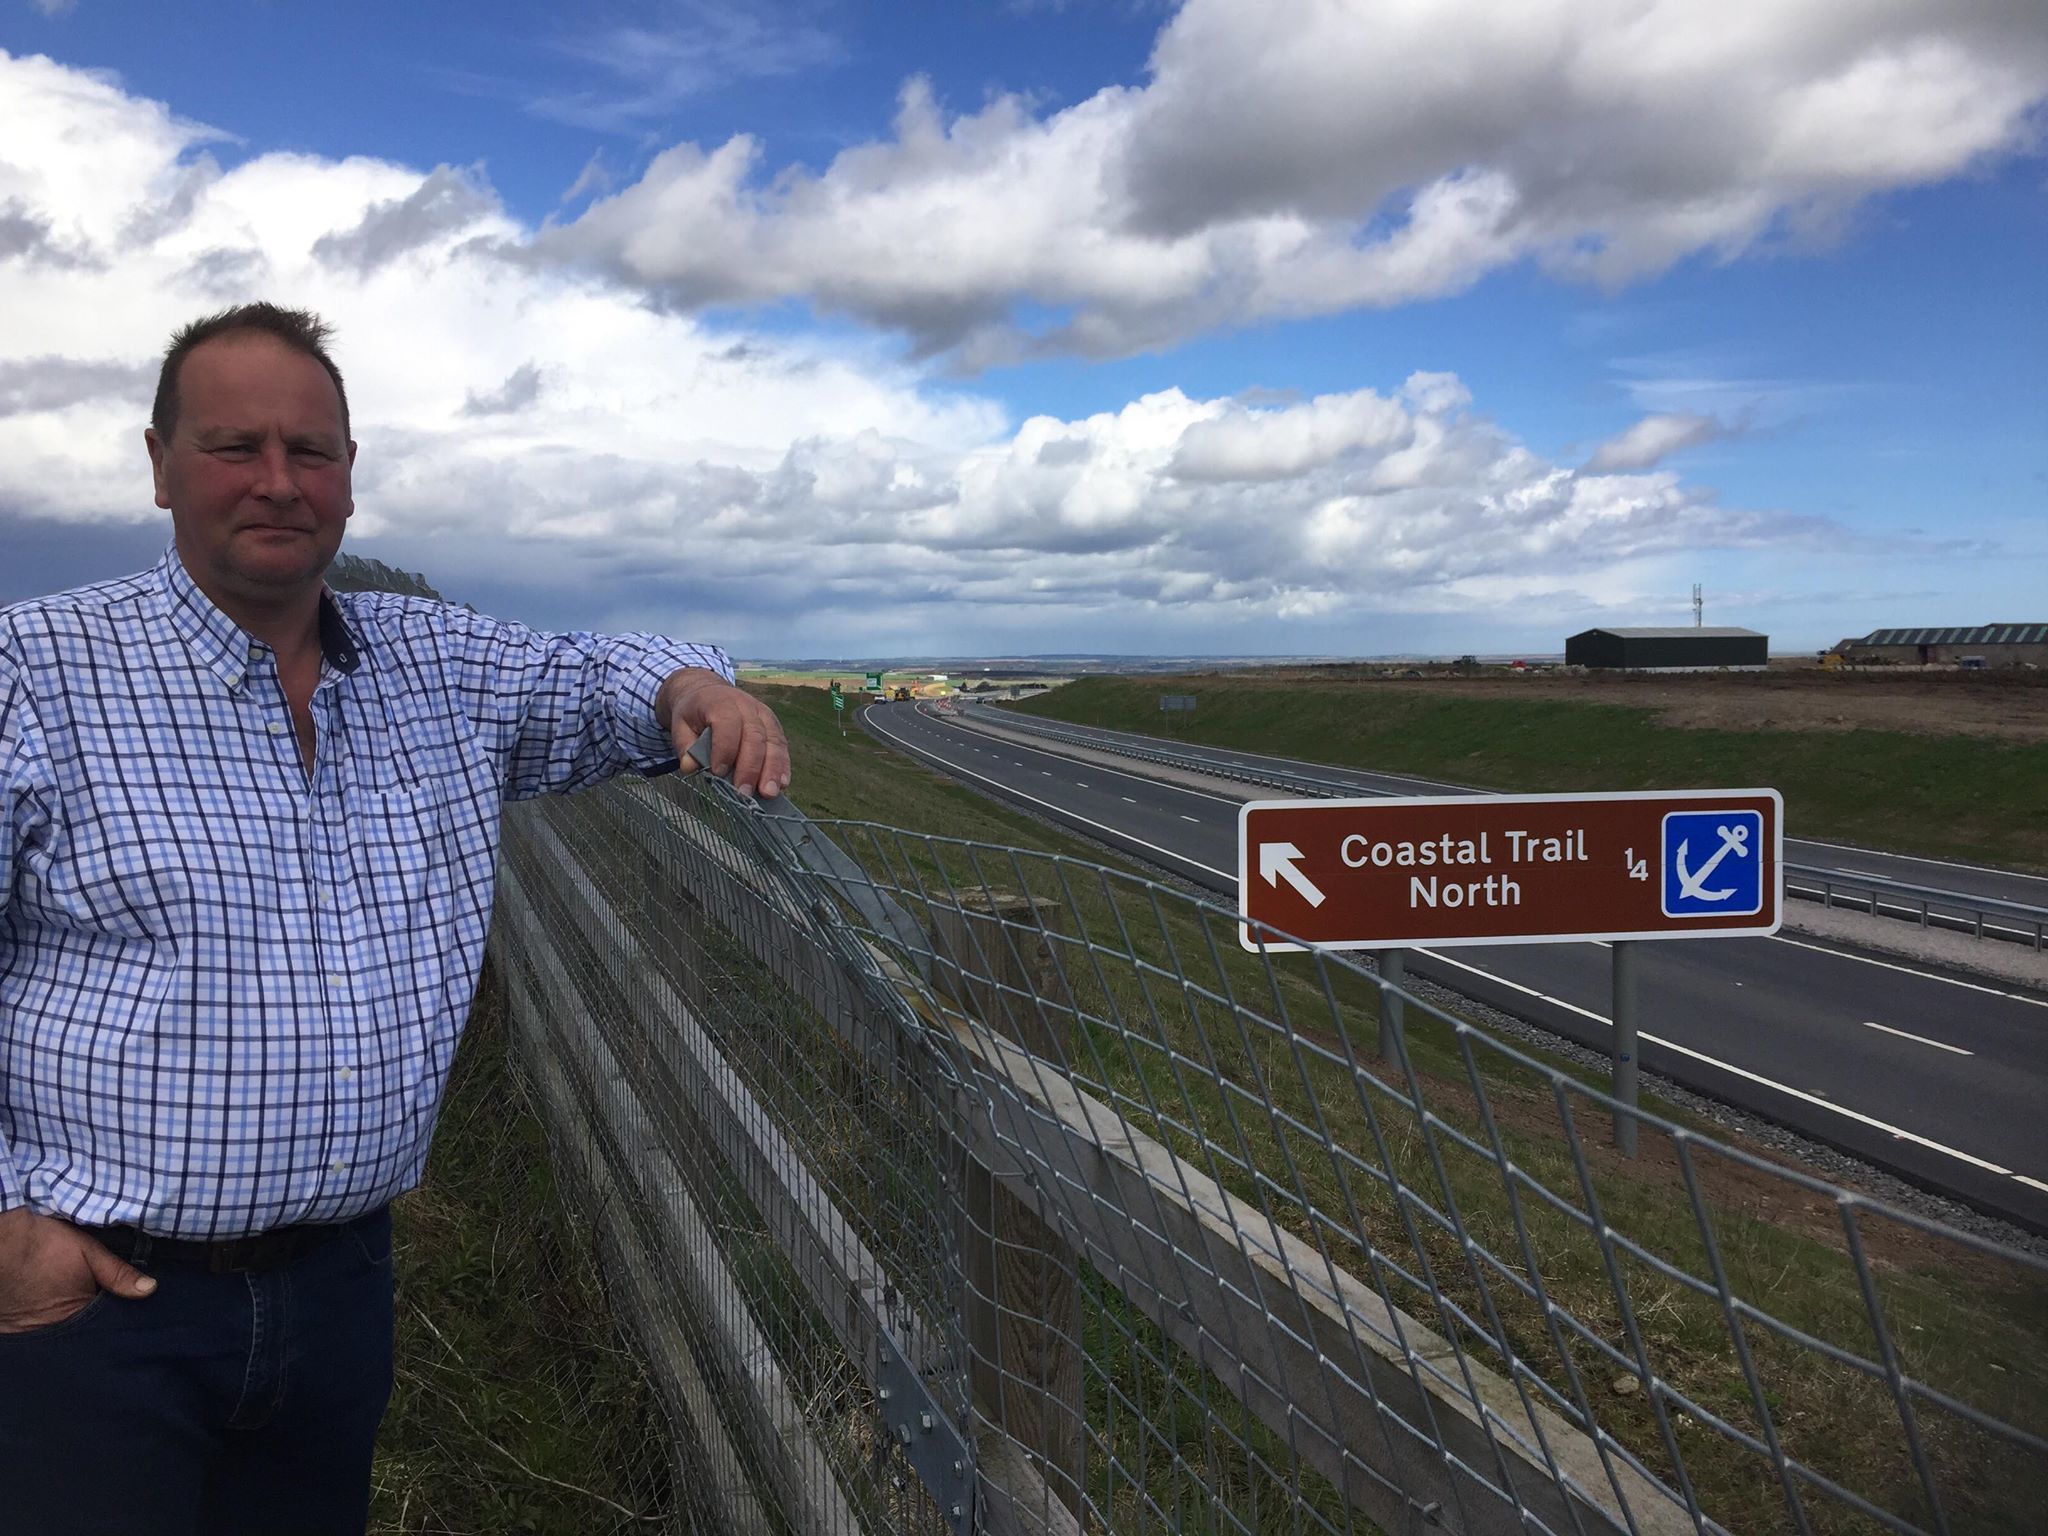 Businessman James Duthie has been angered by the "lack of joined up thinking" as new Coastal Route signage bypasses Balmedie